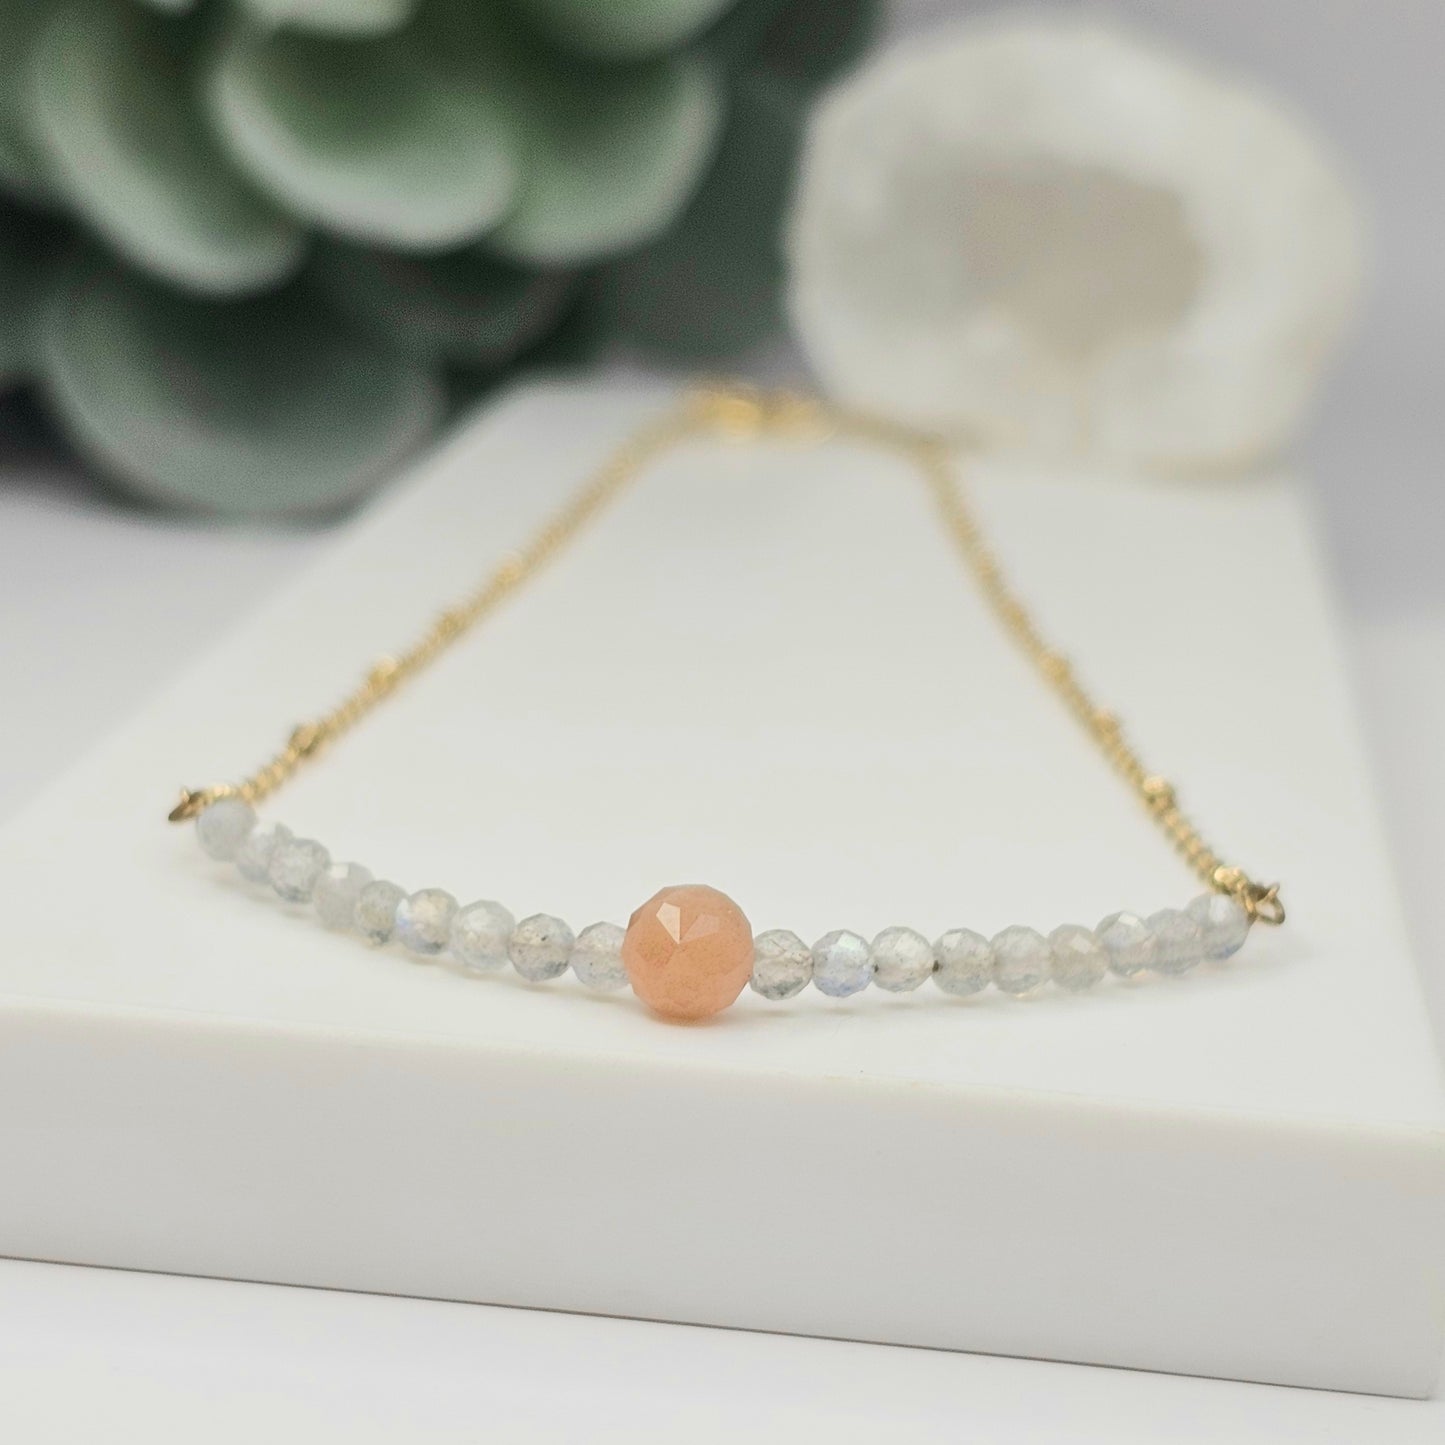 Gold toned stainless steel chain adorned with dainty Sunstone and Labradorite beads.